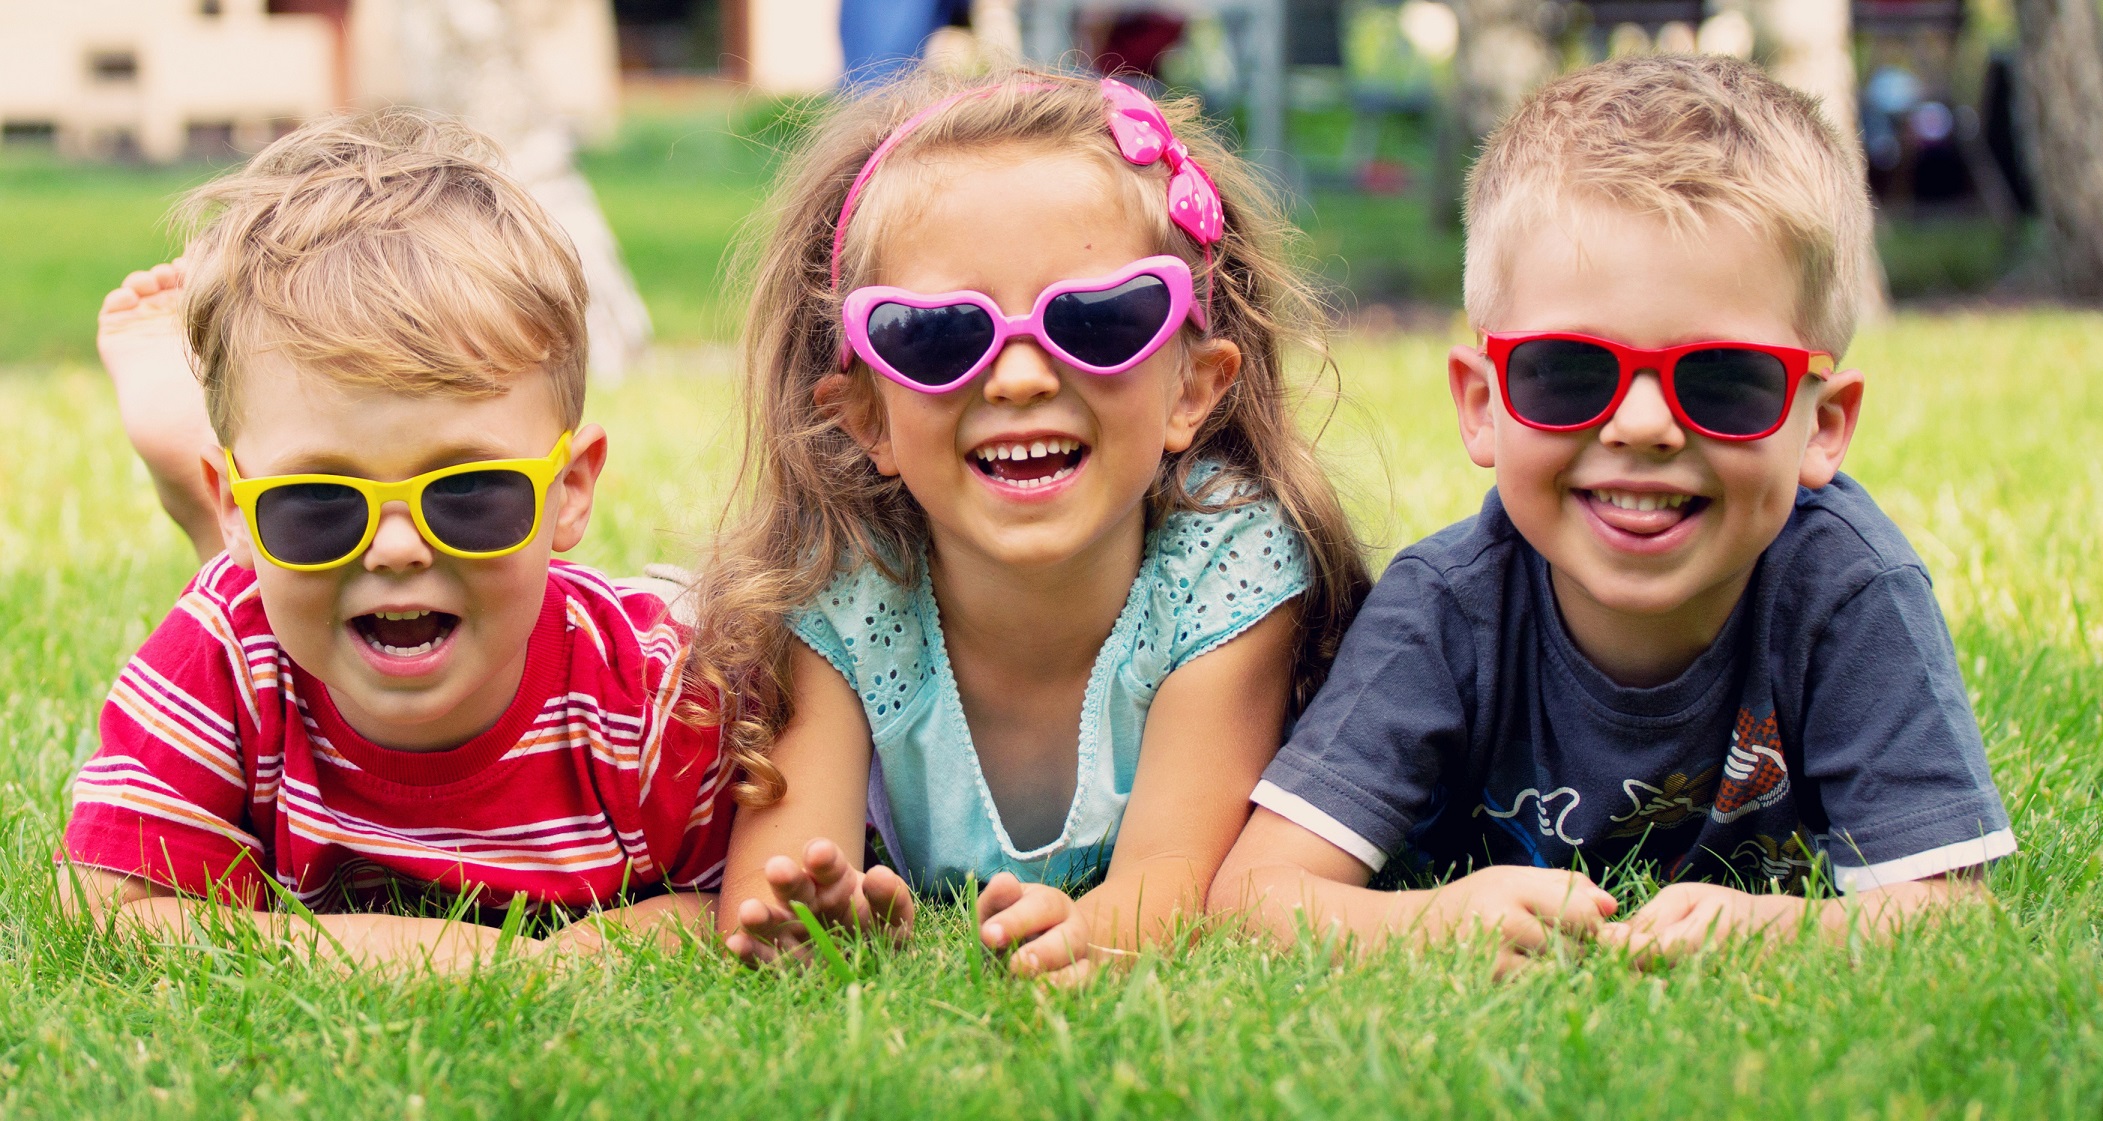 Image of three children laying on the grass wearing sunglasses for UV protection.